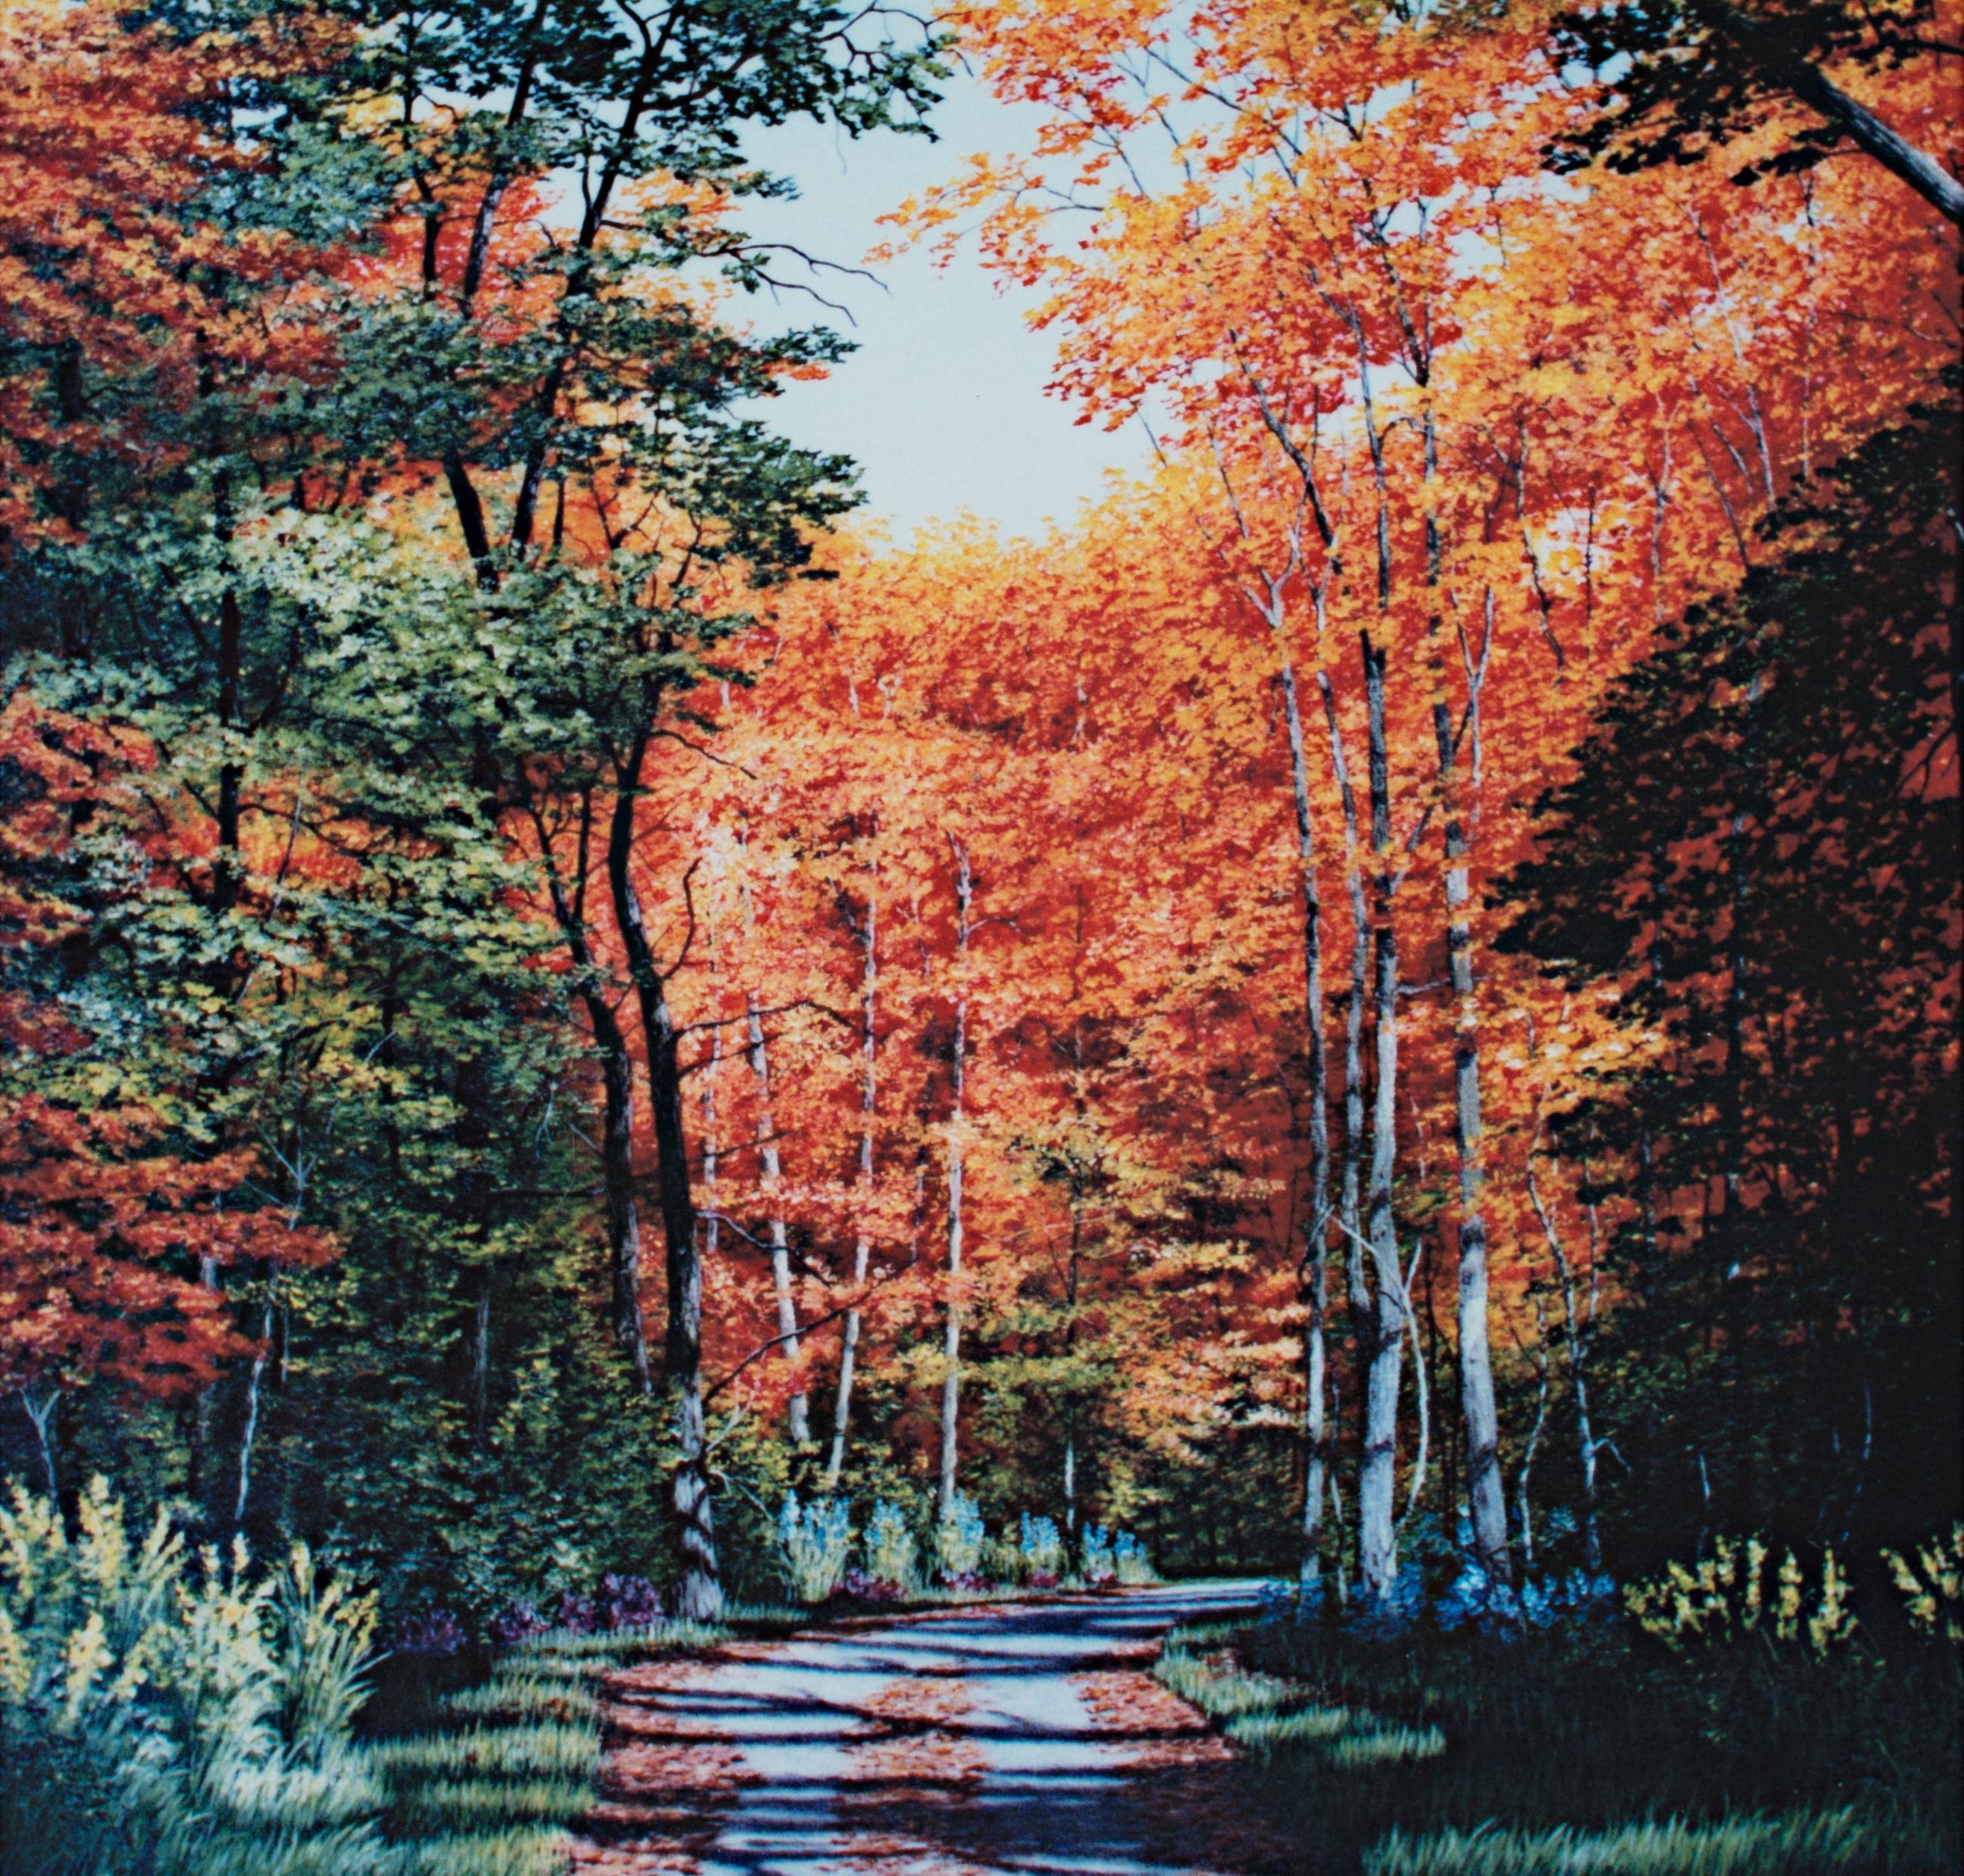 "Autumn in Wisconsin" is a giclee print on board after the original oil painting by Gregory D. Steele. This fall forest view looks down a small road. The leaves have gathered showing the tire marks. The foliage on the ground is still green but the